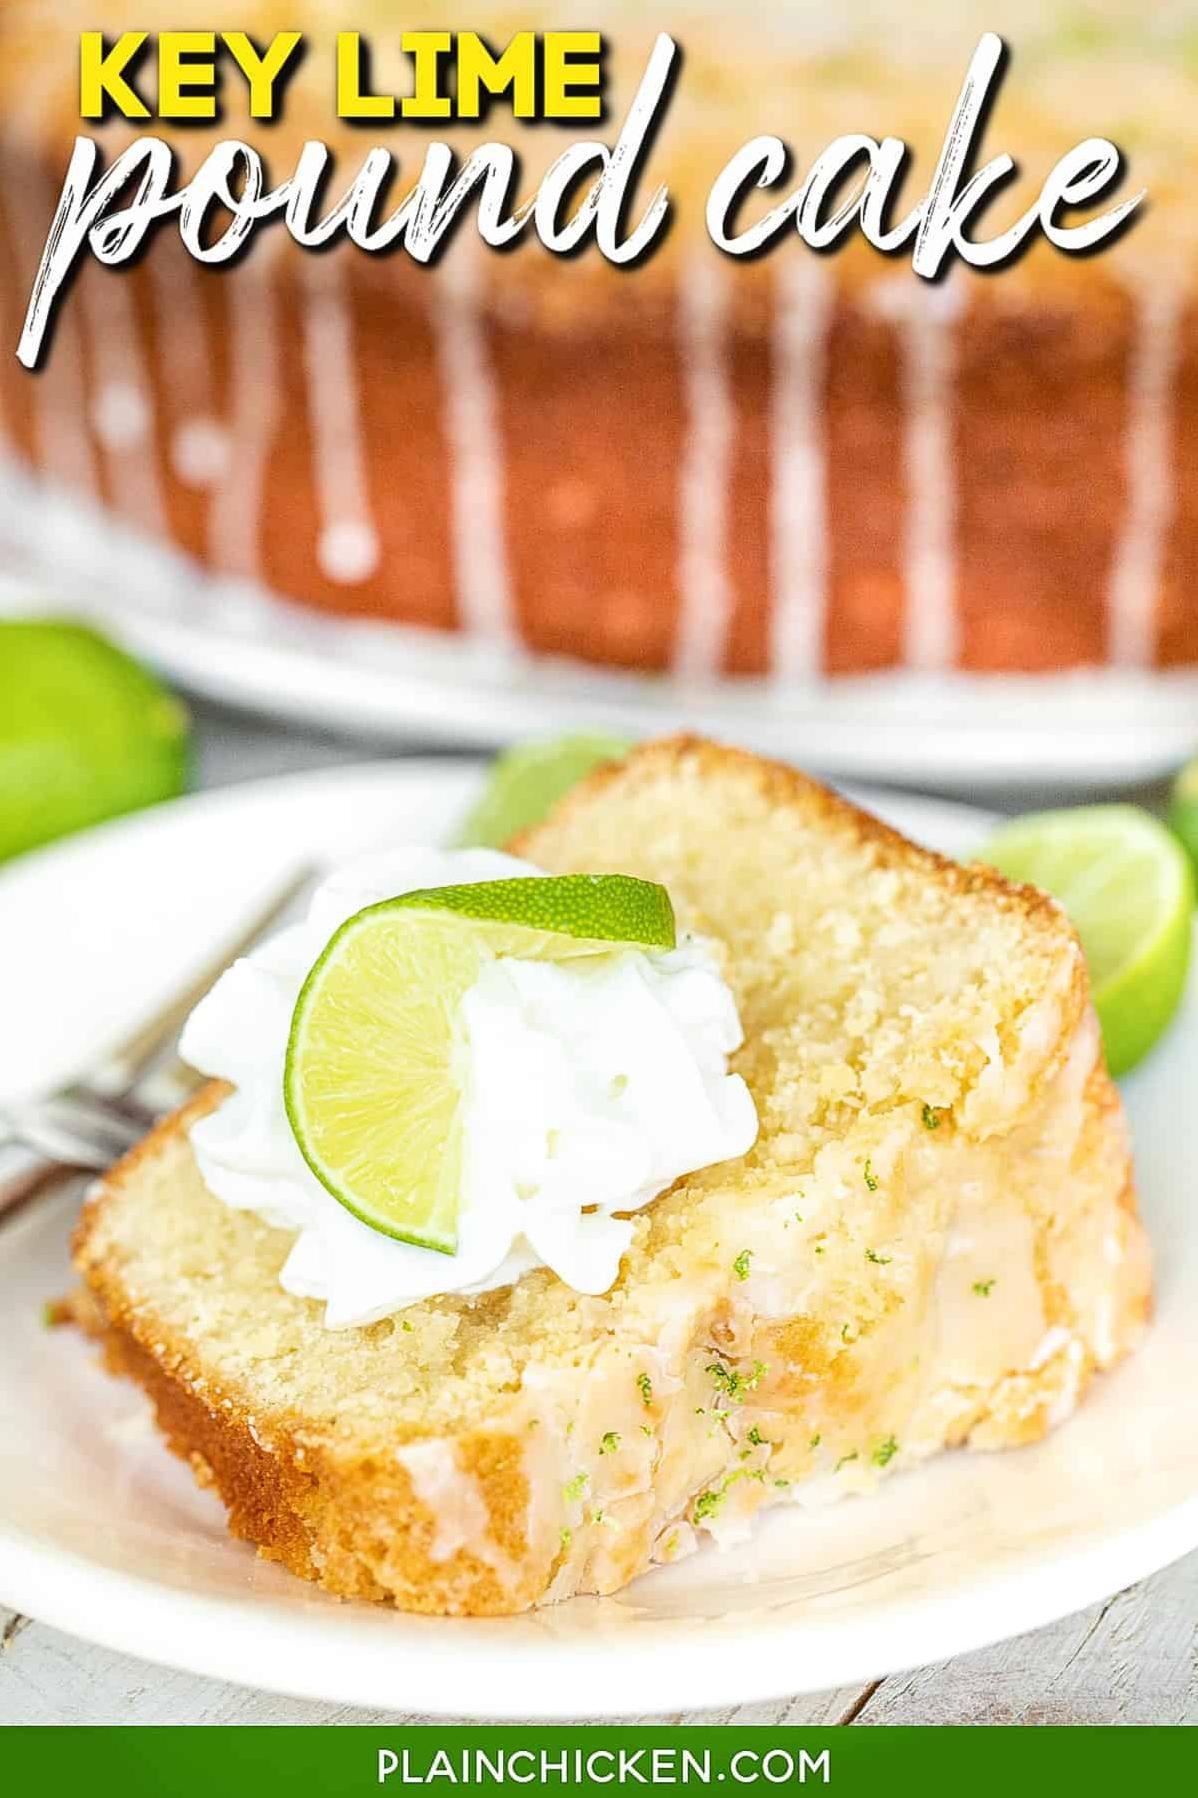  One bite of this pound cake and you'll be transported to a sunny beach.